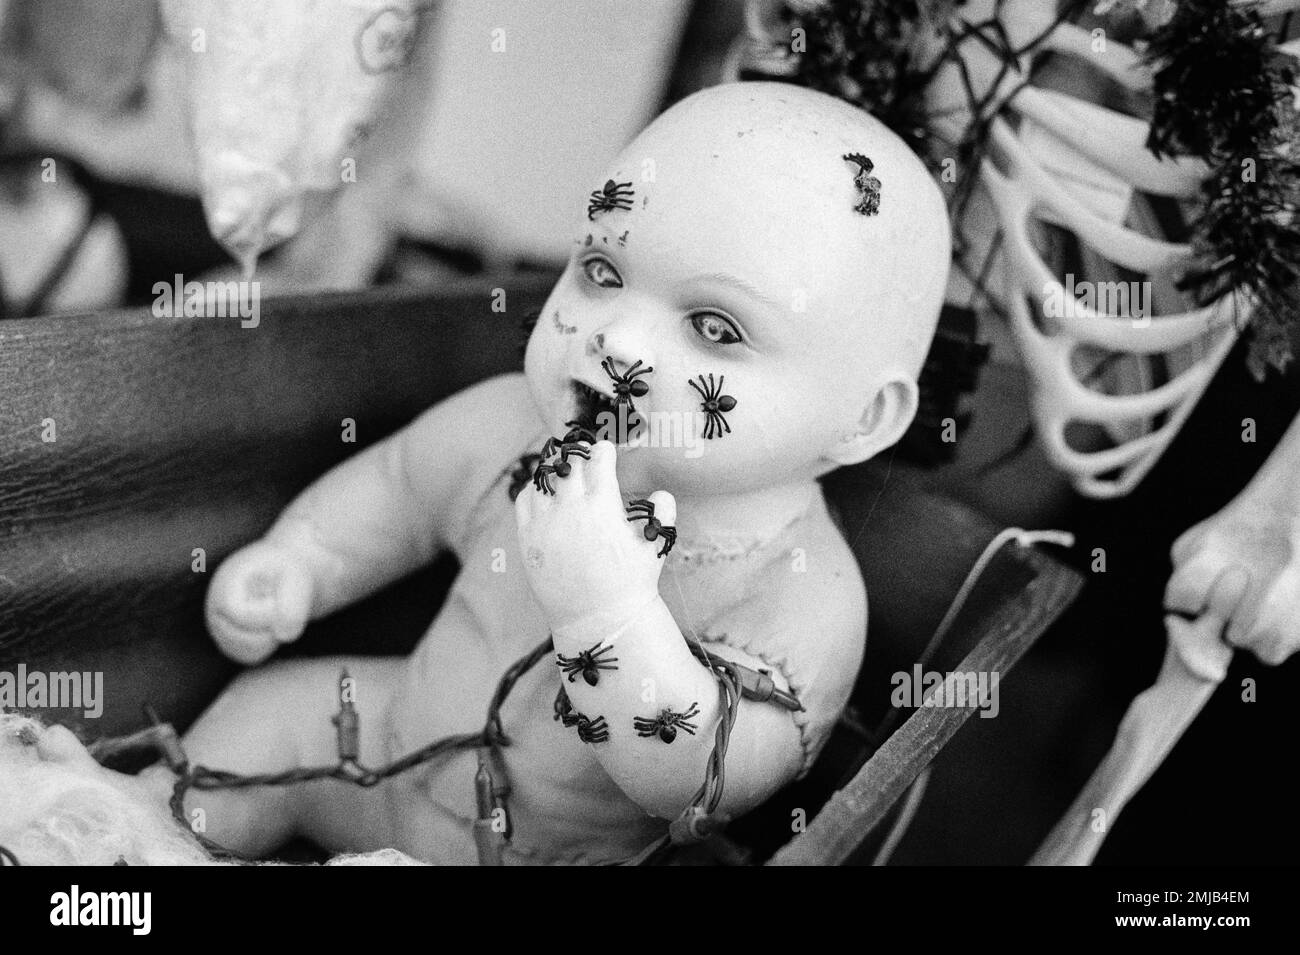 A baby doll appears to be eating spiders that cover its body in a Halloween display at the Deerfield Fair, New Hampshire. Image was captured on analog Stock Photo